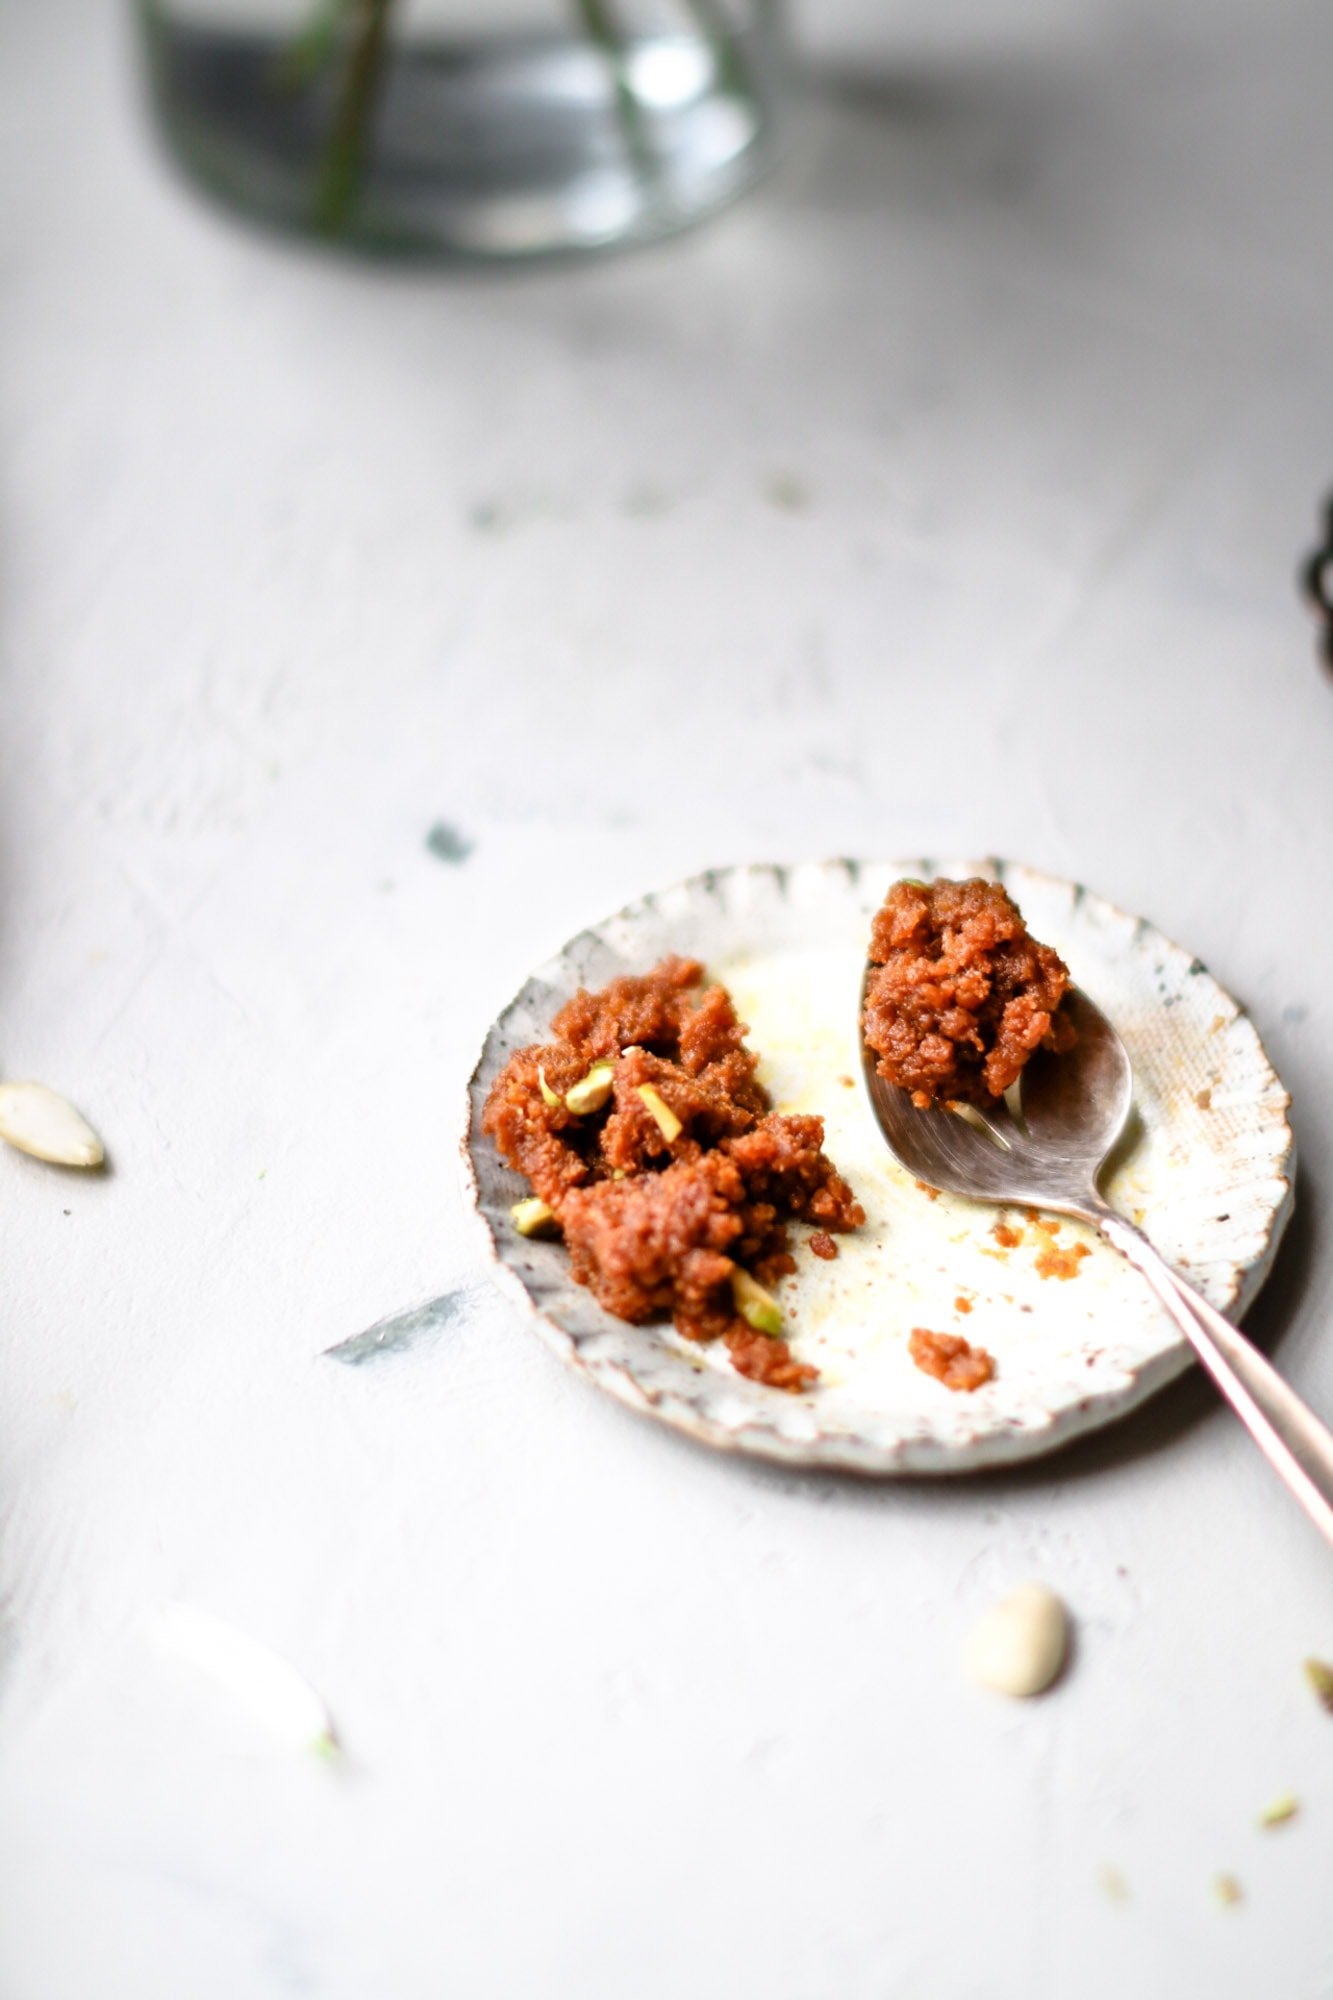 Partially eaten Instant Pot Carrot Halwa on a small clay plate with a silver spoon